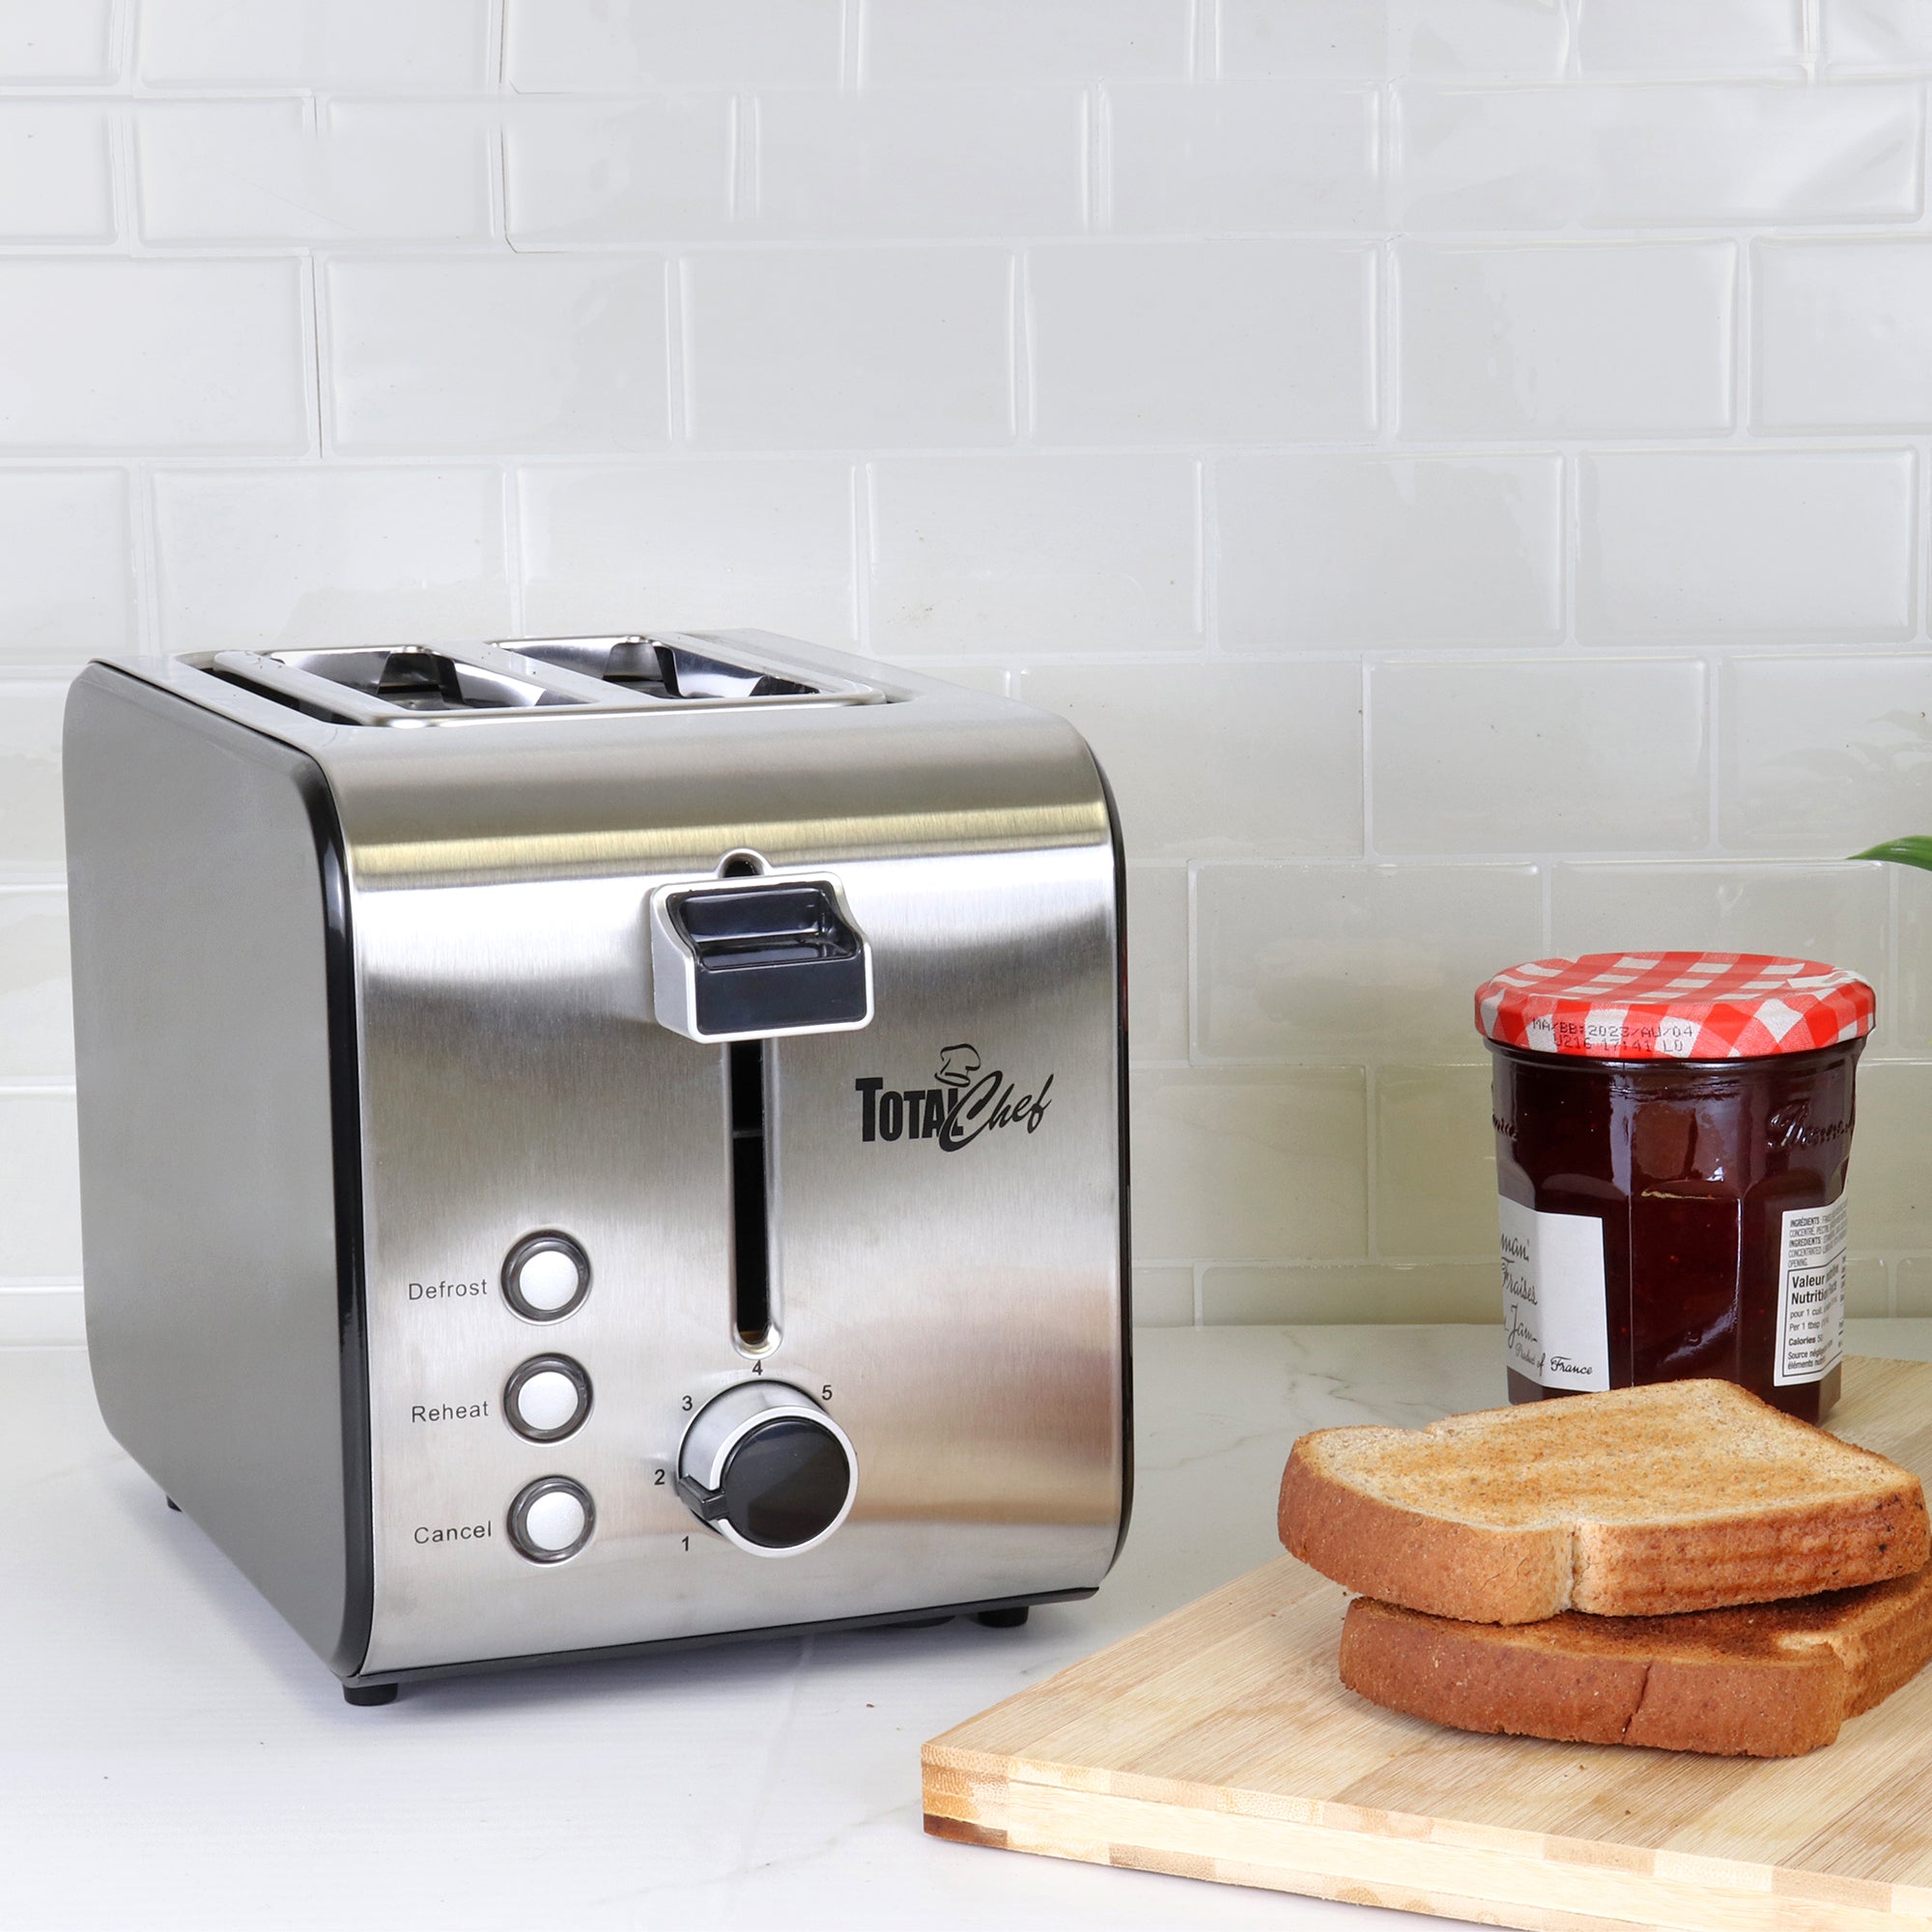 Lifestyle image of toaster beside cutting board with two slices of toast and a jar of jam on a white countertop with white backsplash